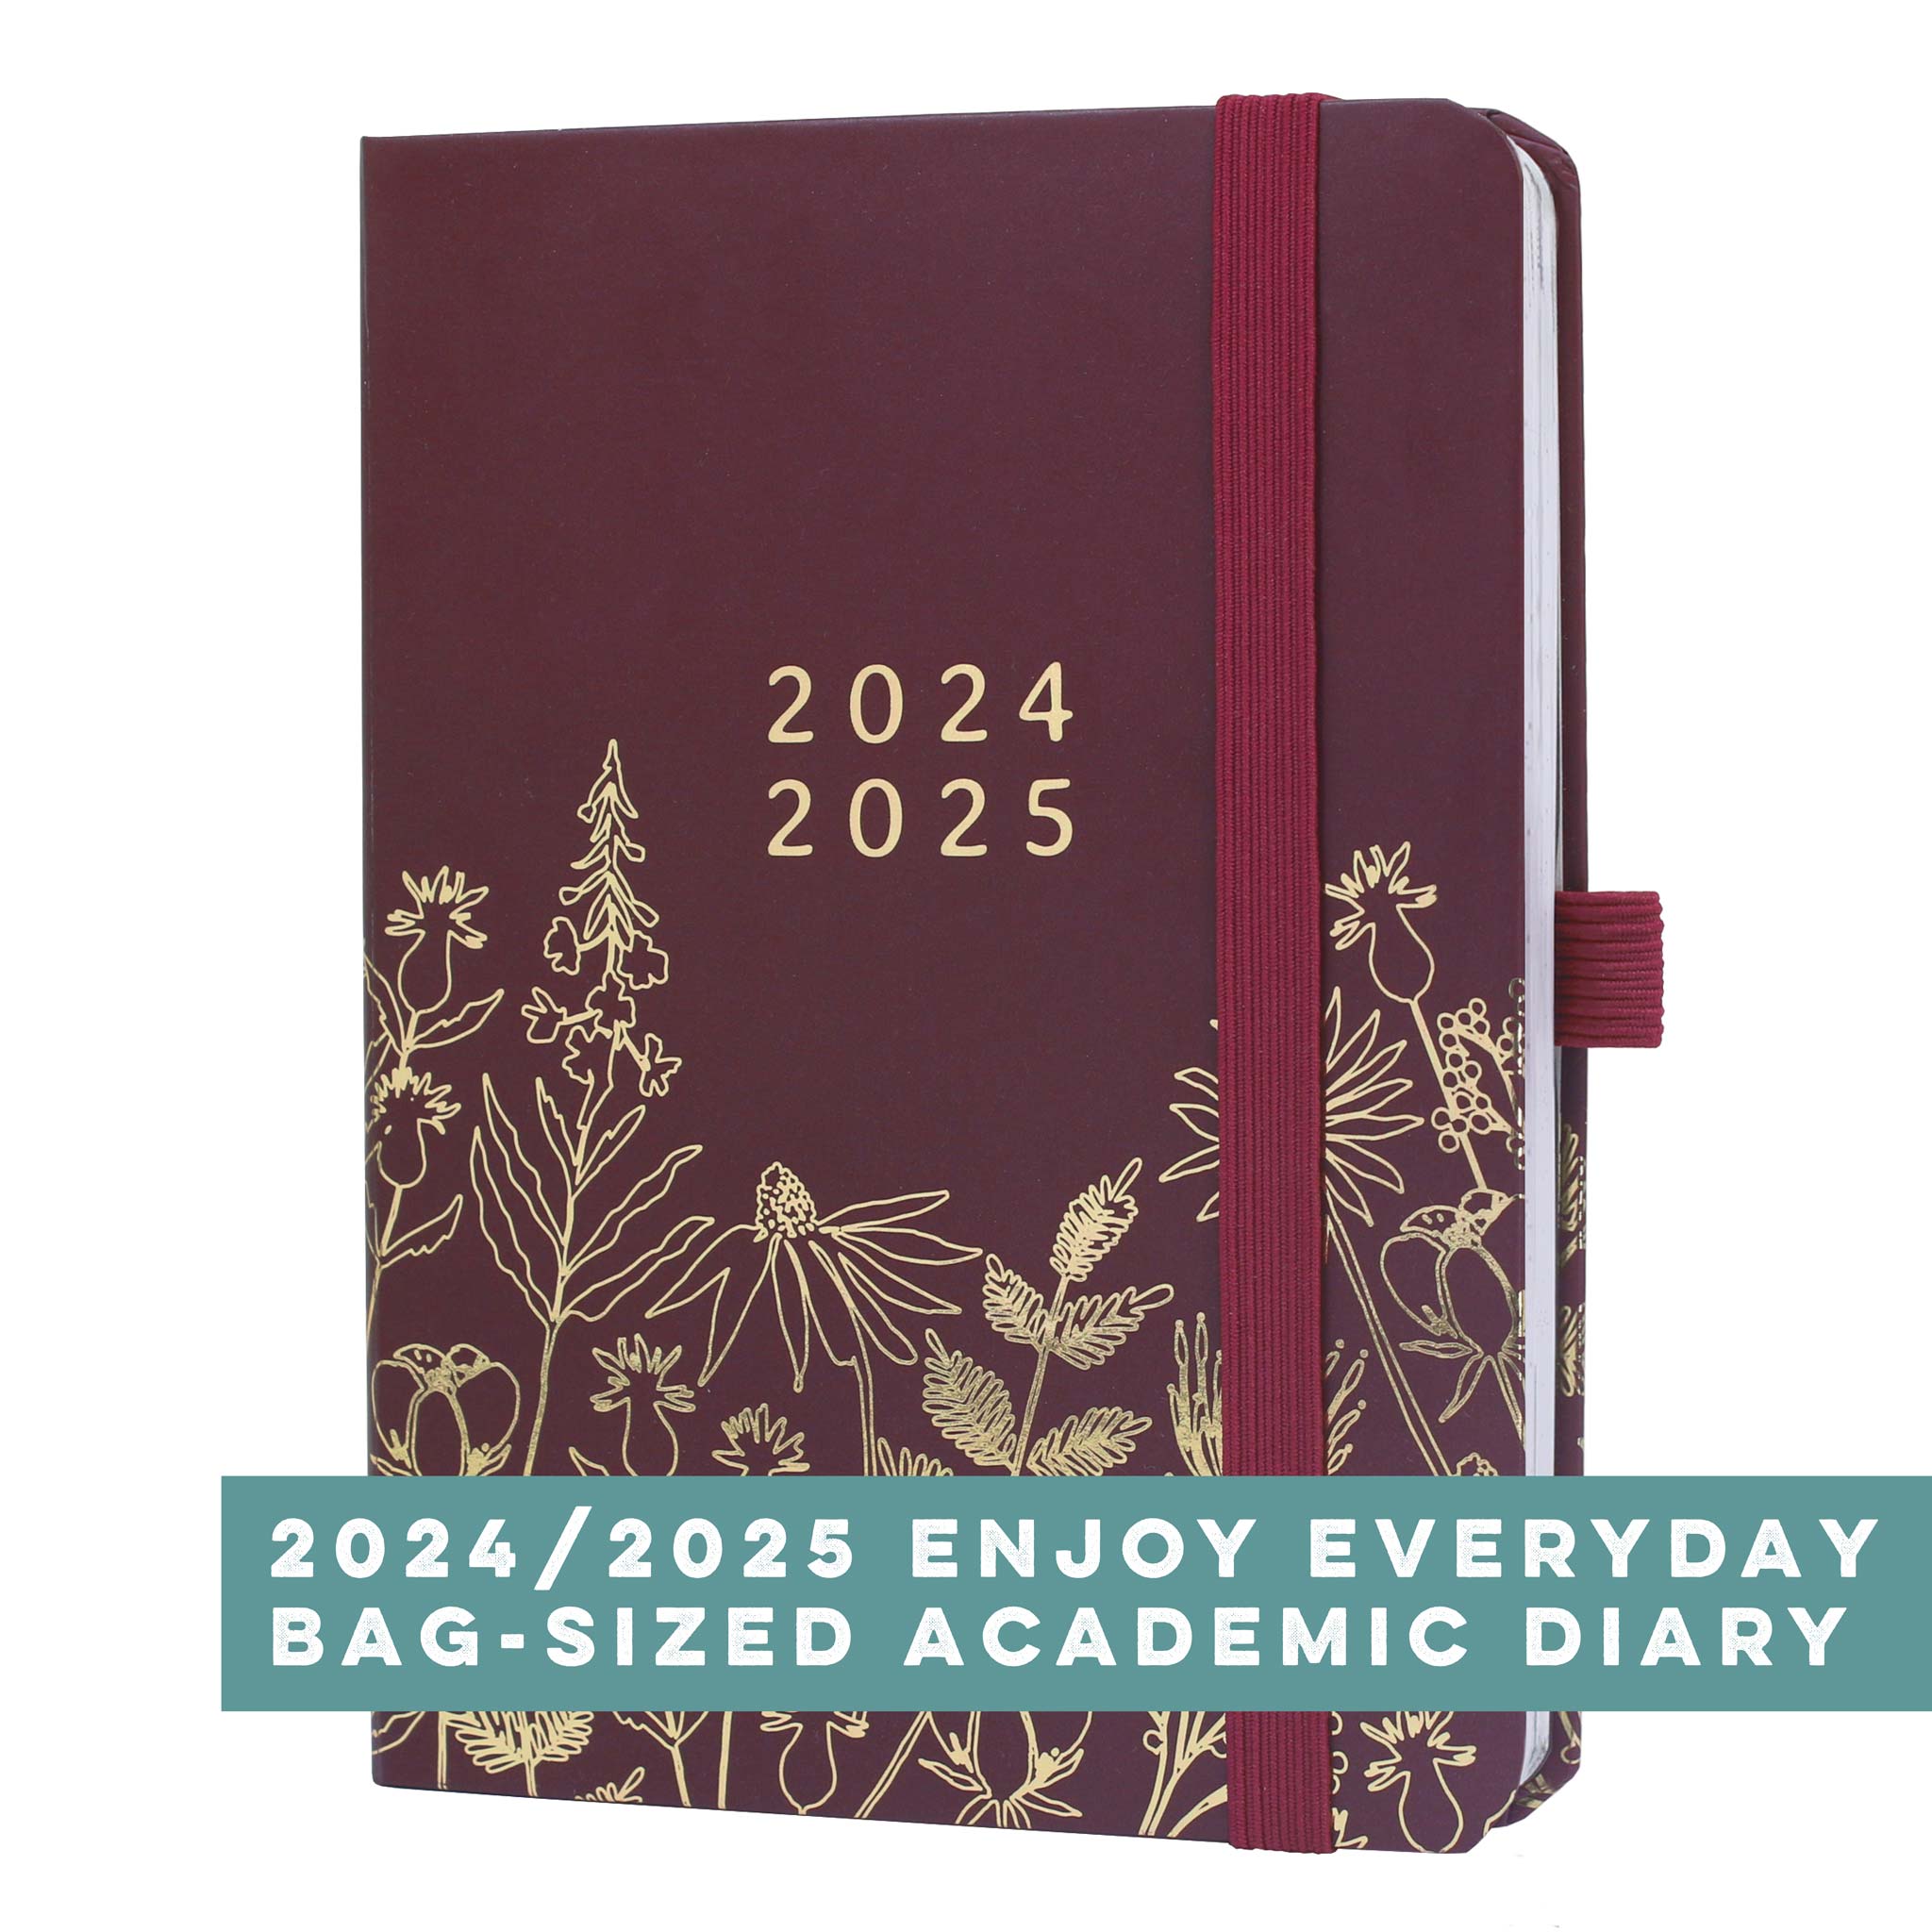 Boxclever Press Everyday Academic Diary 2024 2025 in a purple and gold floral design